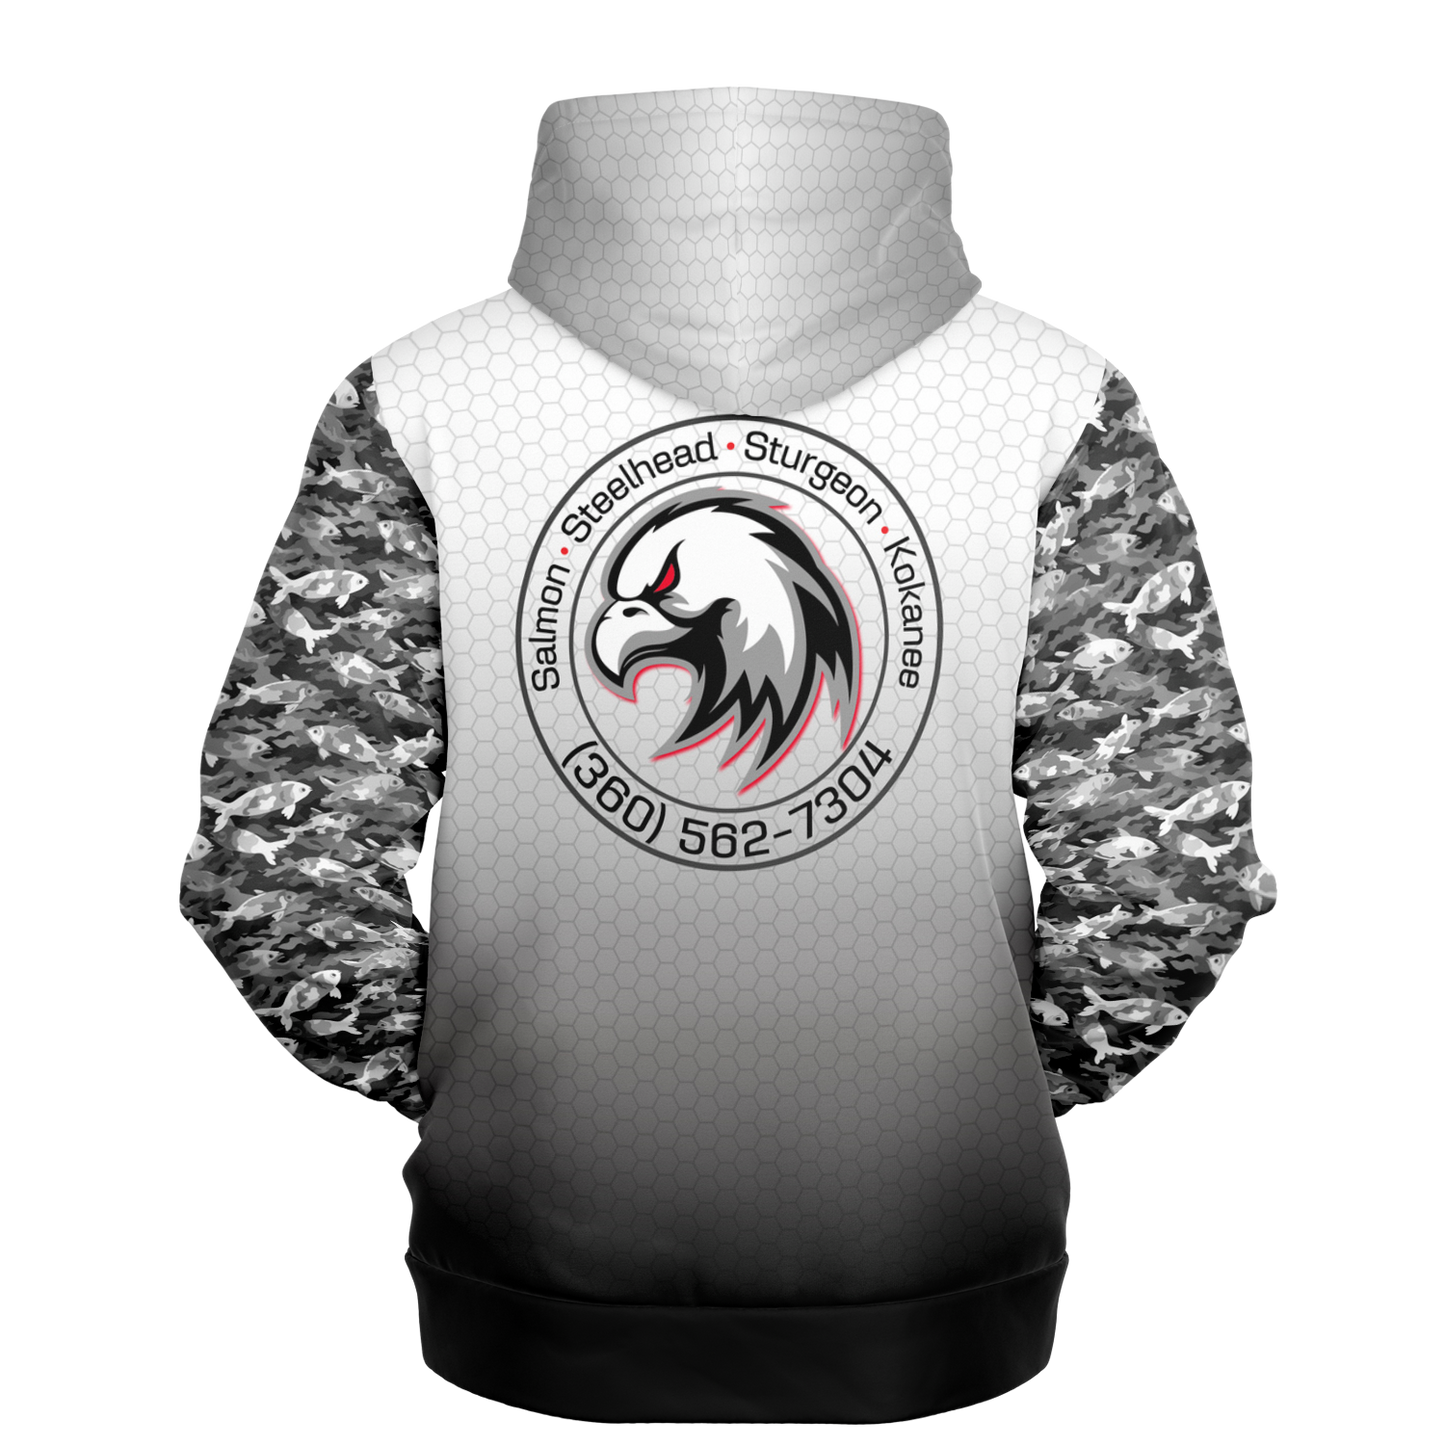 A digitally designed gray and white Angry Eagle Performance hoodie with the logo "full tilt outdoors" in red letters across the chest, showcased on a plain black background.